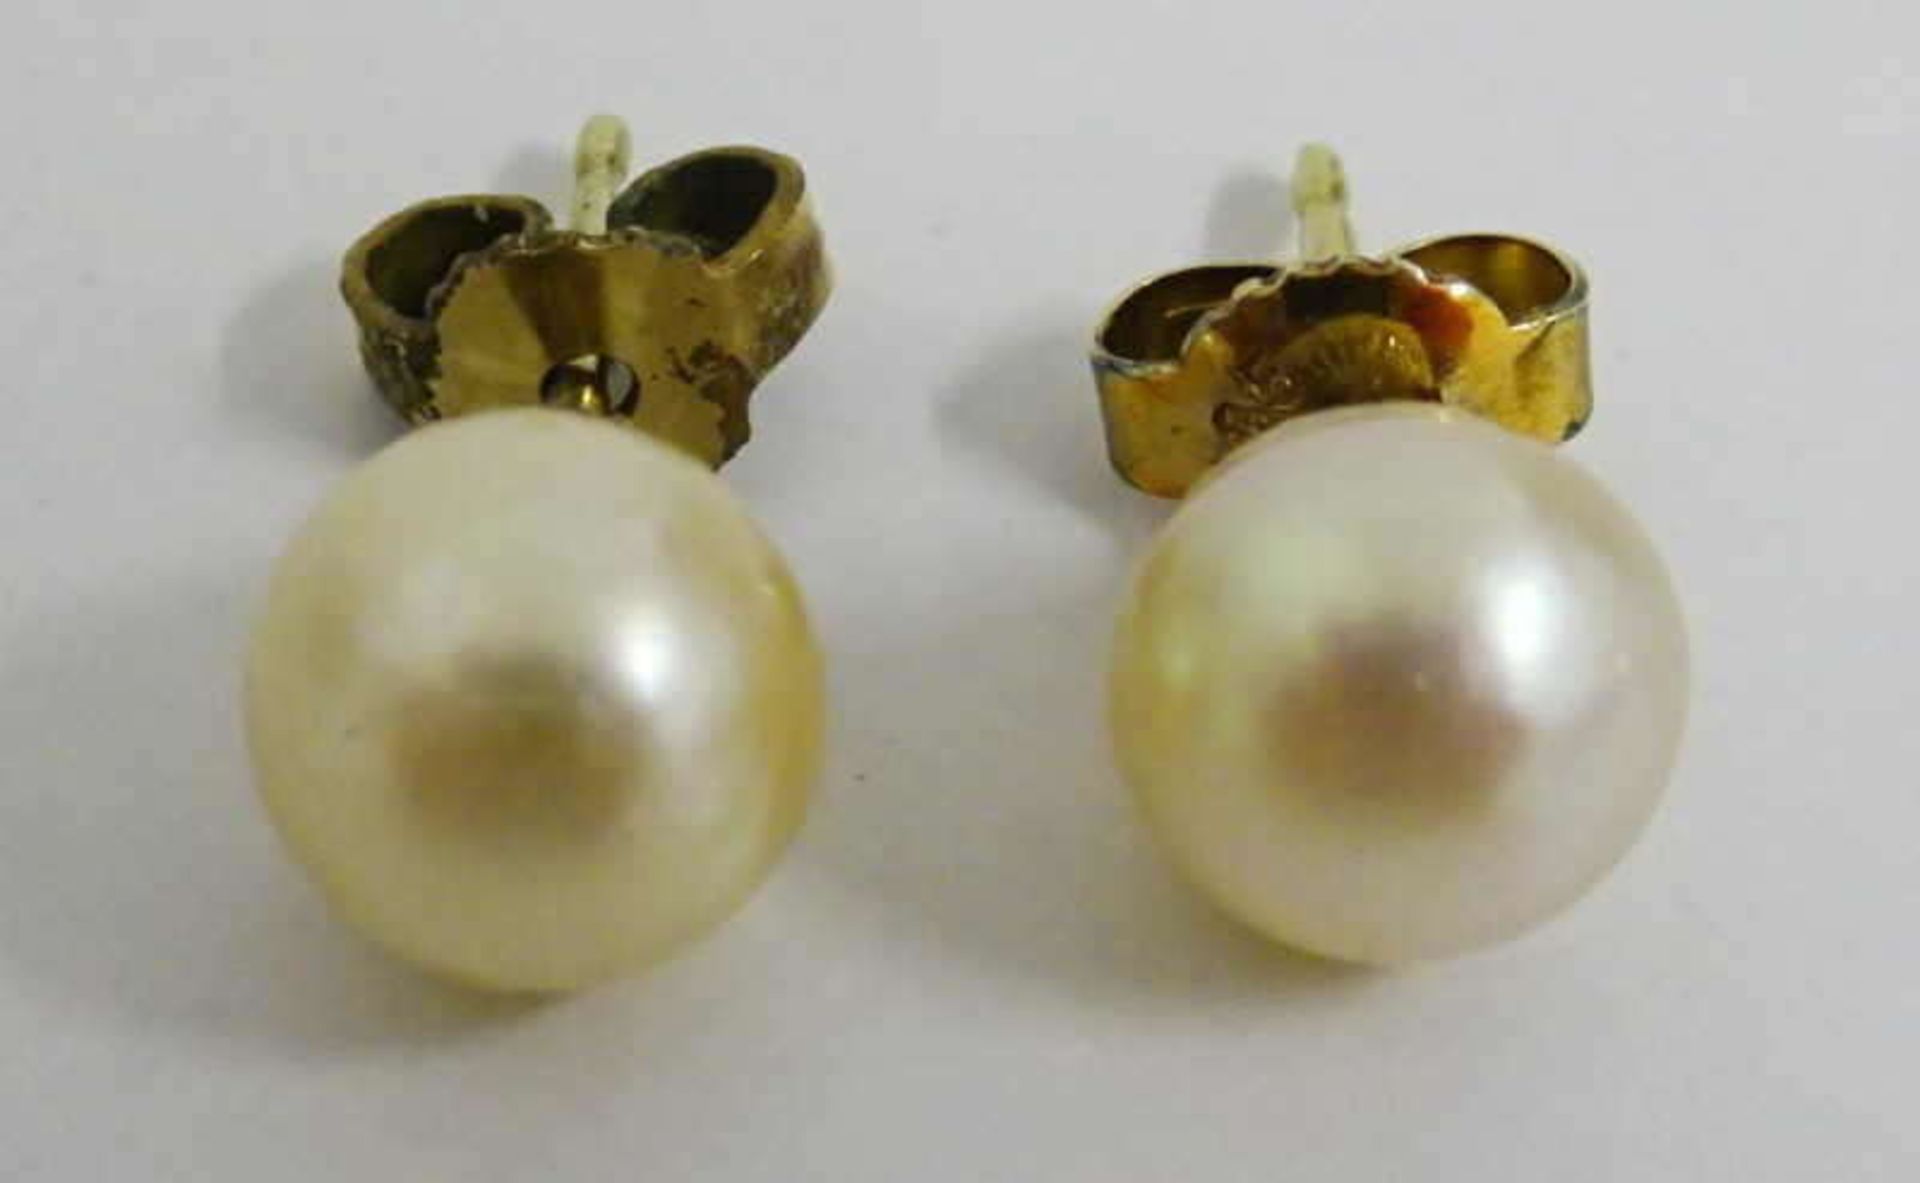 1 Paar Perlohrringe in 585er Gelbgold Fassung.1 pair of pearl earrings in 585 yellow gold setting.